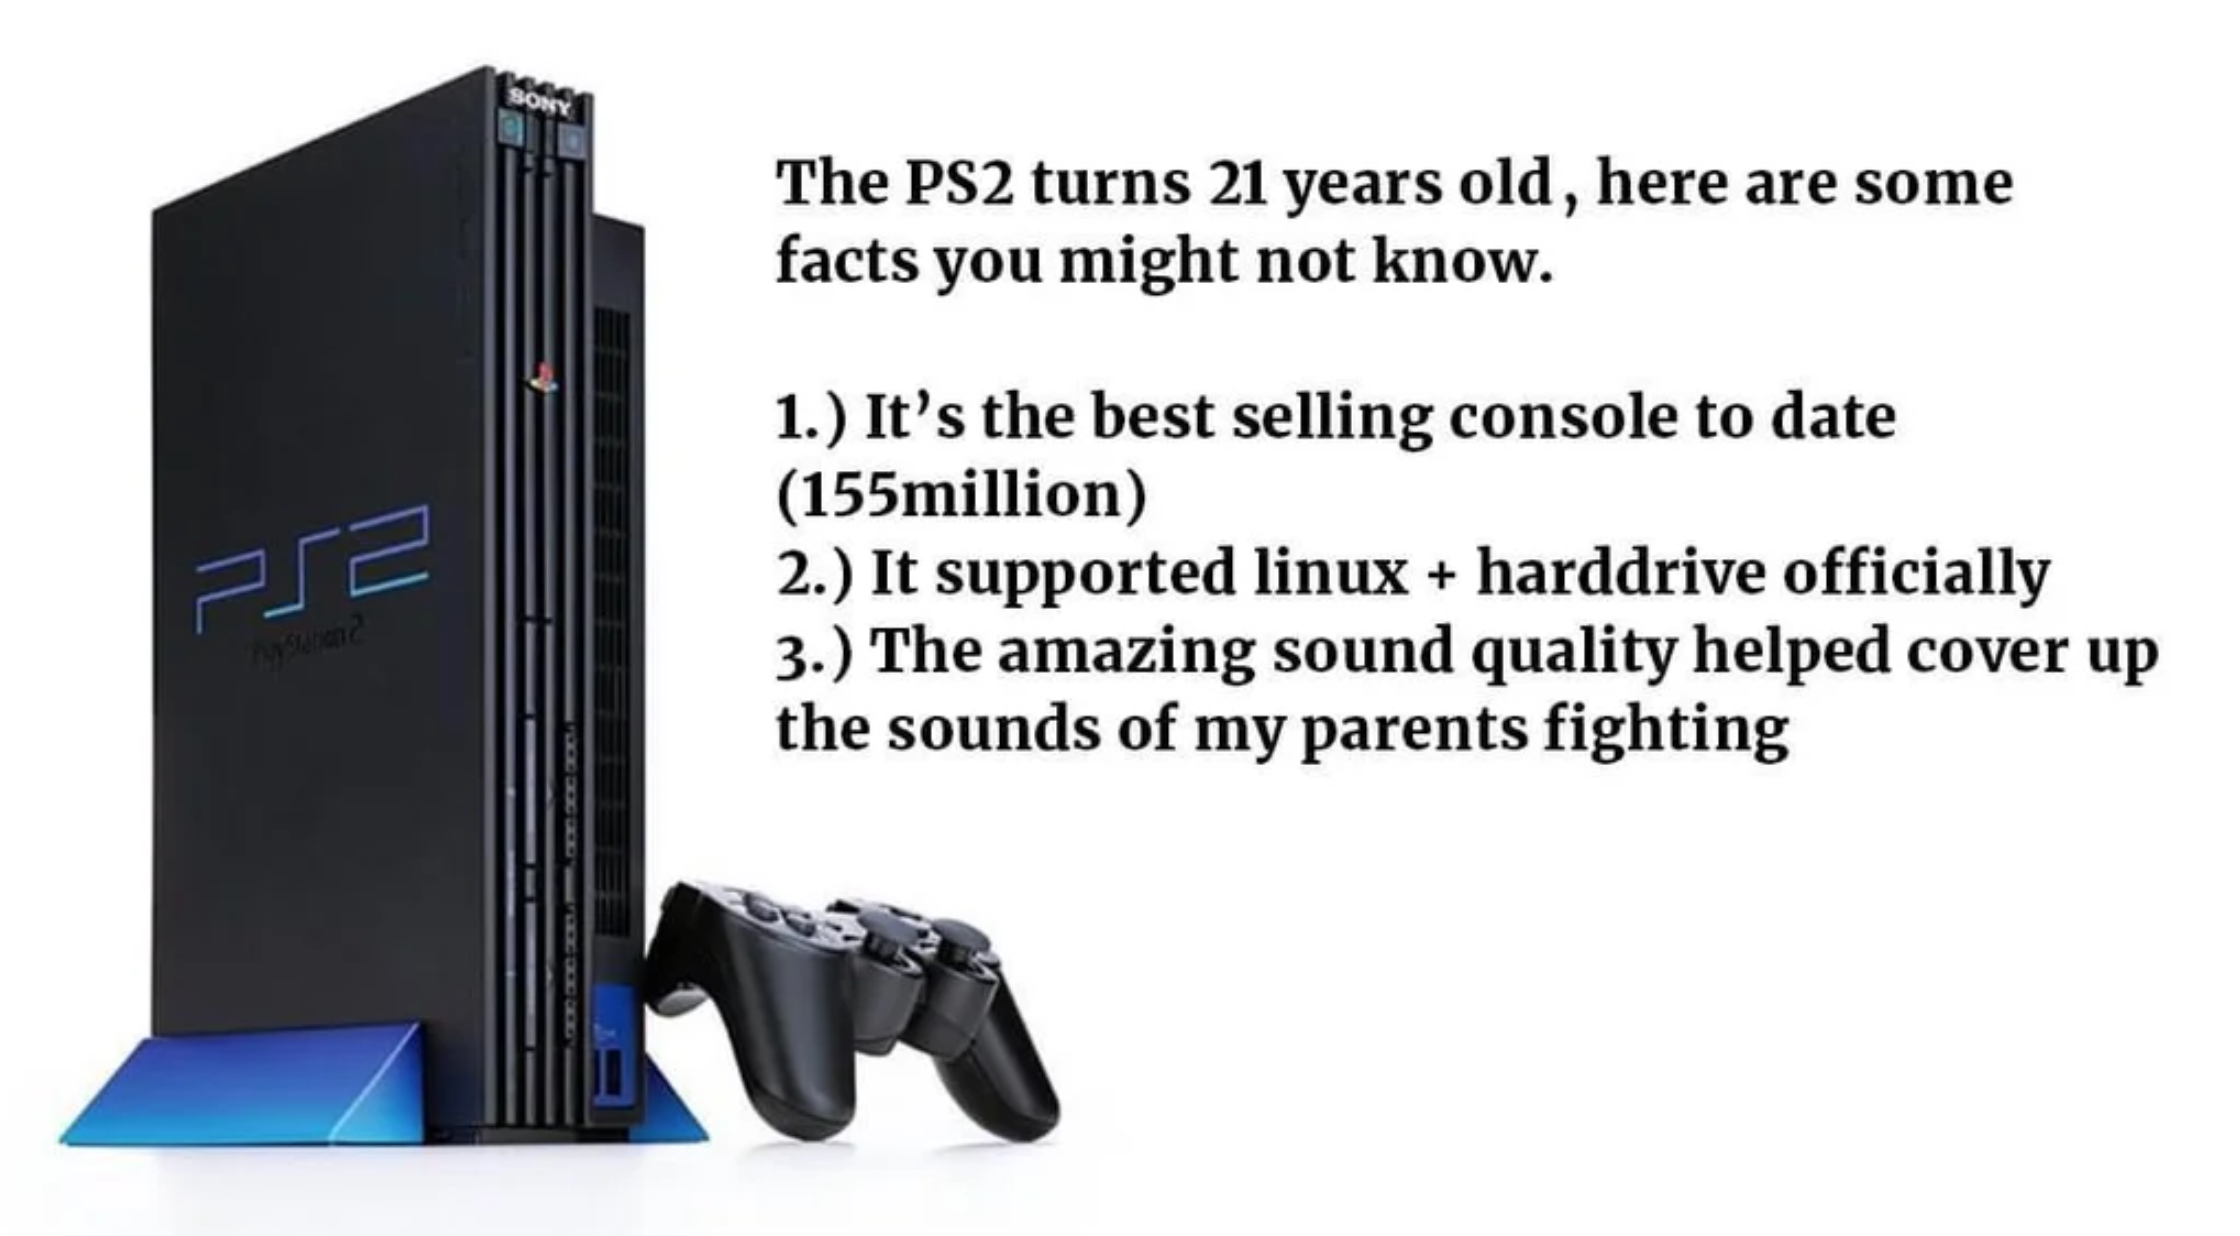 funny gaming memes - output device - The PS2 turns 21 years old, here are some facts you might not know. 1. It's the best selling console to date 155million 2. It supported linux harddrive officially 3. The amazing sound quality helped cover up the sounds